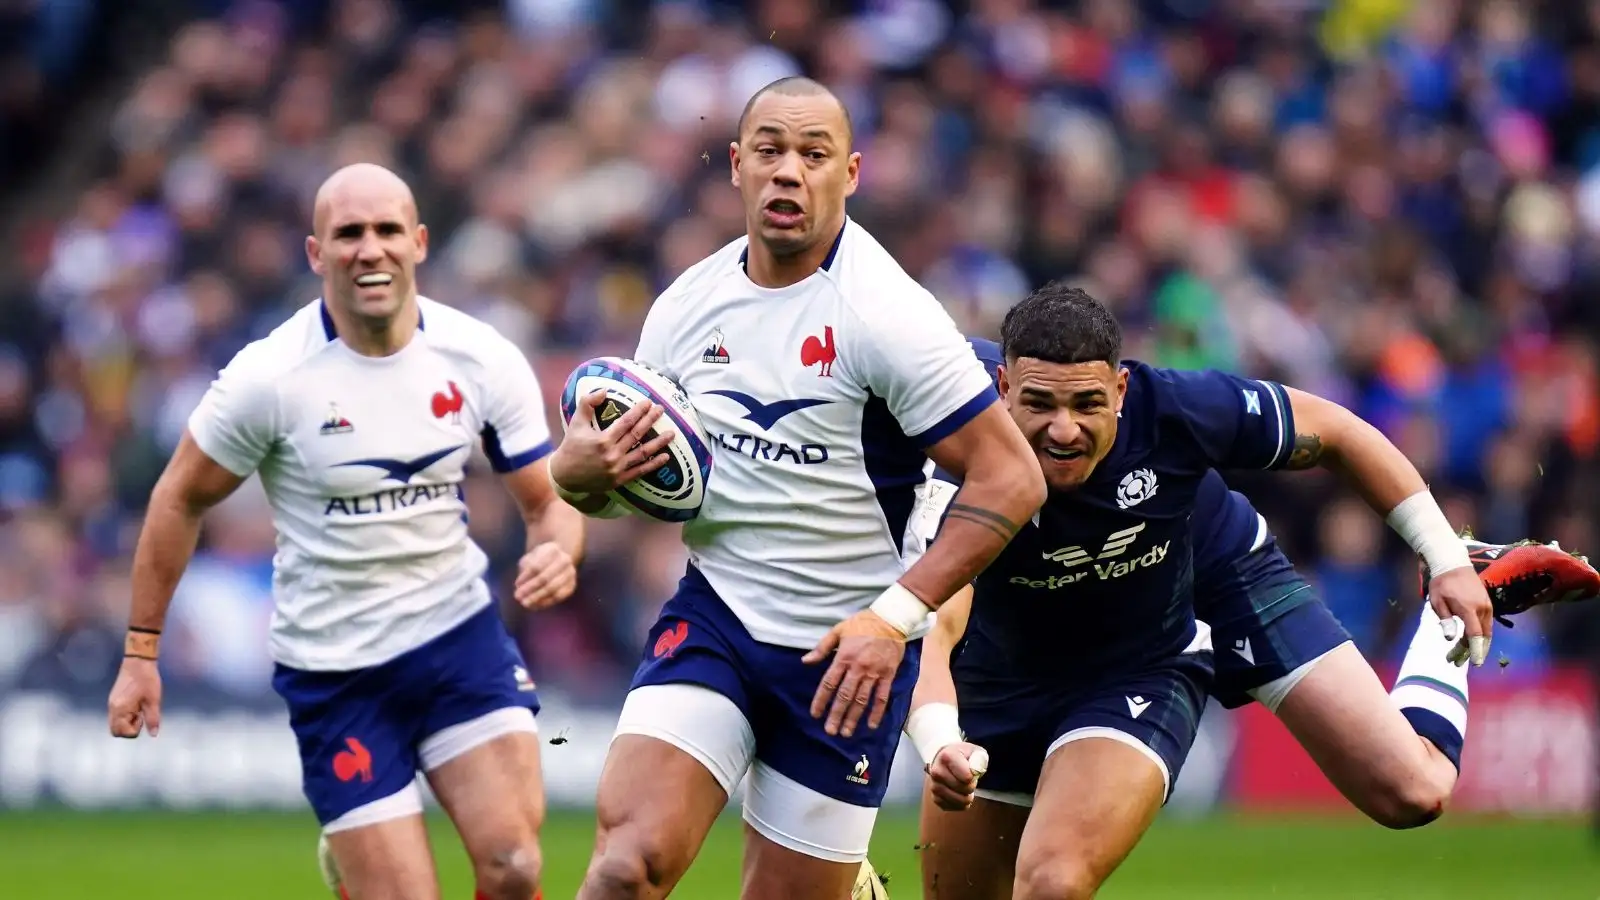 France's Gael Fickou attempts to break through the Scotland defence during the Guinness Six Nations match.